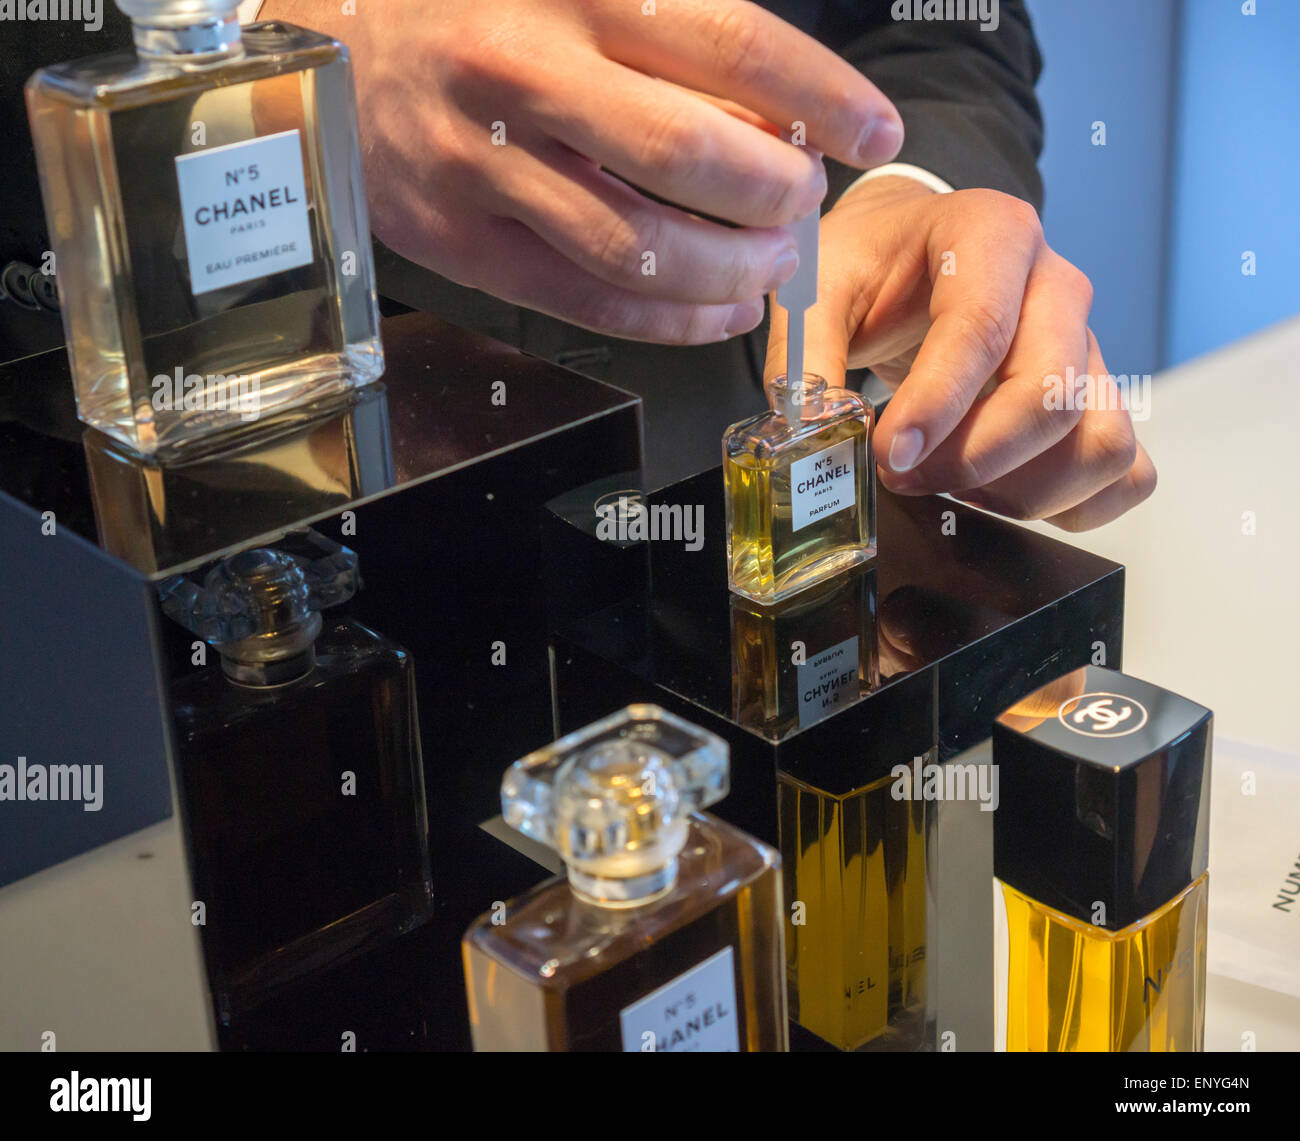 A host dispenses samples of the original Chanel No.5 perfume at a branding event in New York in the Meatpacking District on Friday, May 8, 2015. Participants got to use interactive exhibits explaining the history of the perfume, created in 1921, and the introduction of a new lighter version of the classic No. 5, Eau Premiére. (© Richard B. Levine) Stock Photo